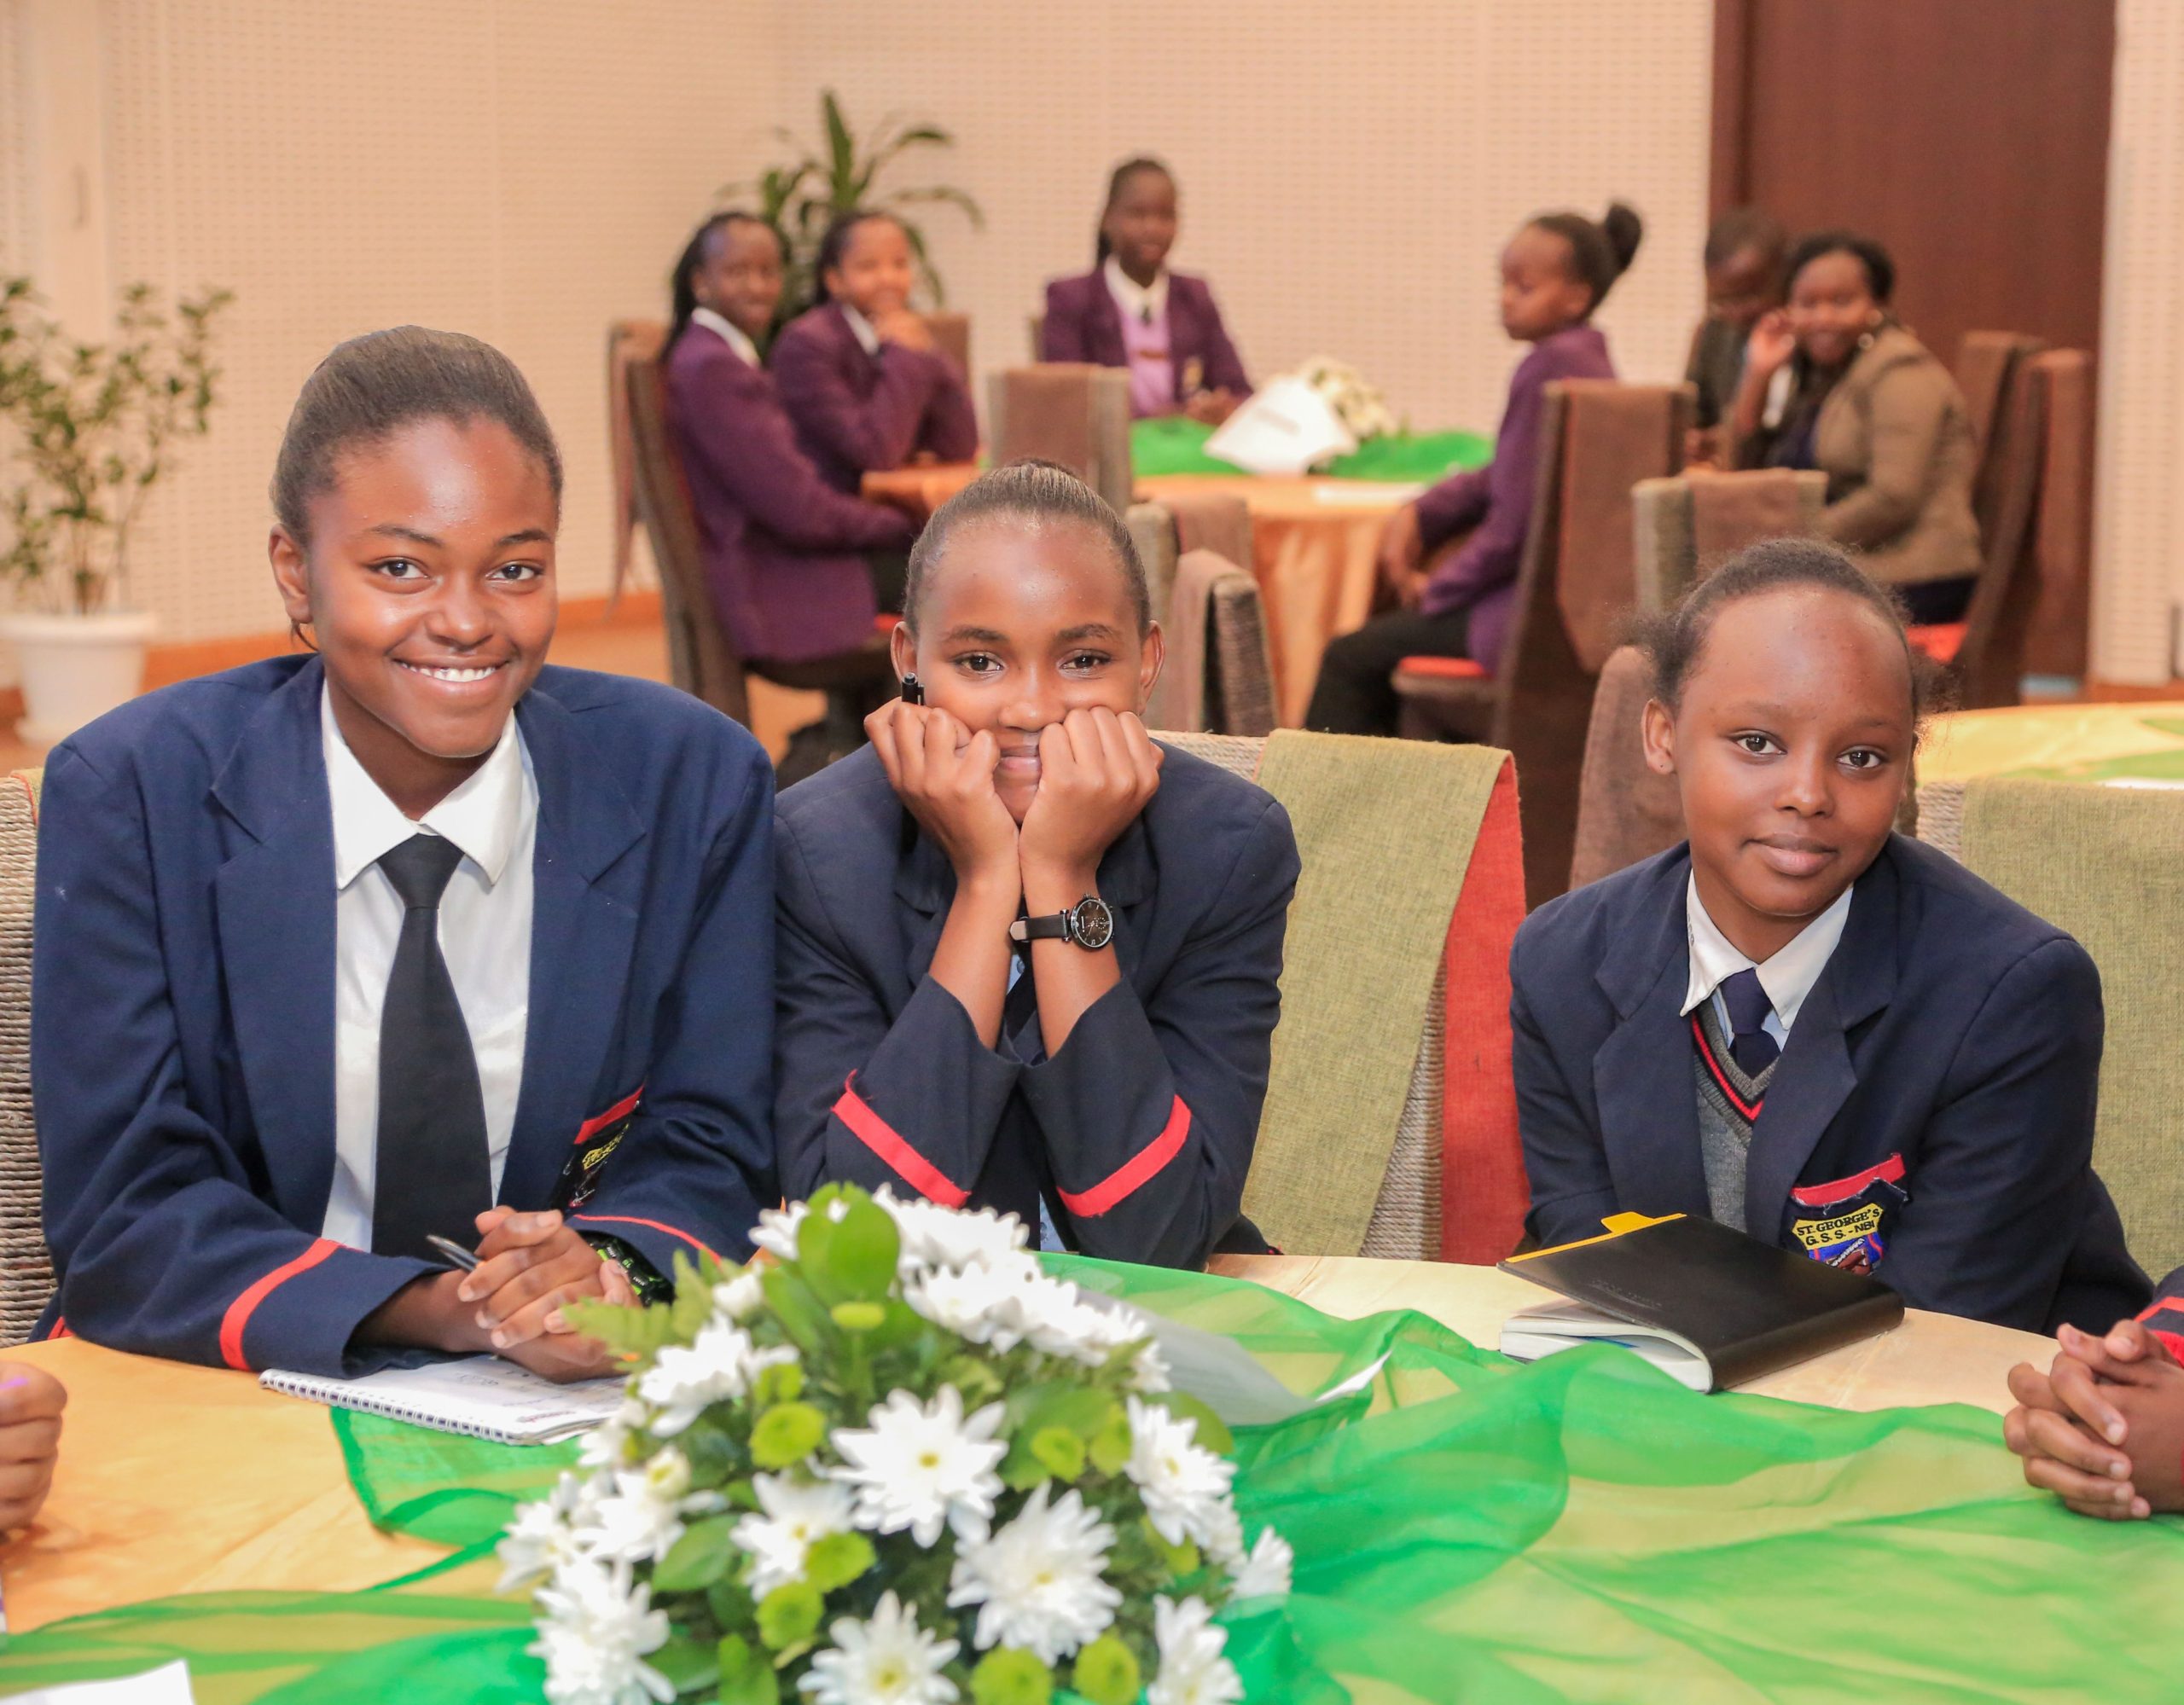 safaricom extends free digital learning as schools remain closed